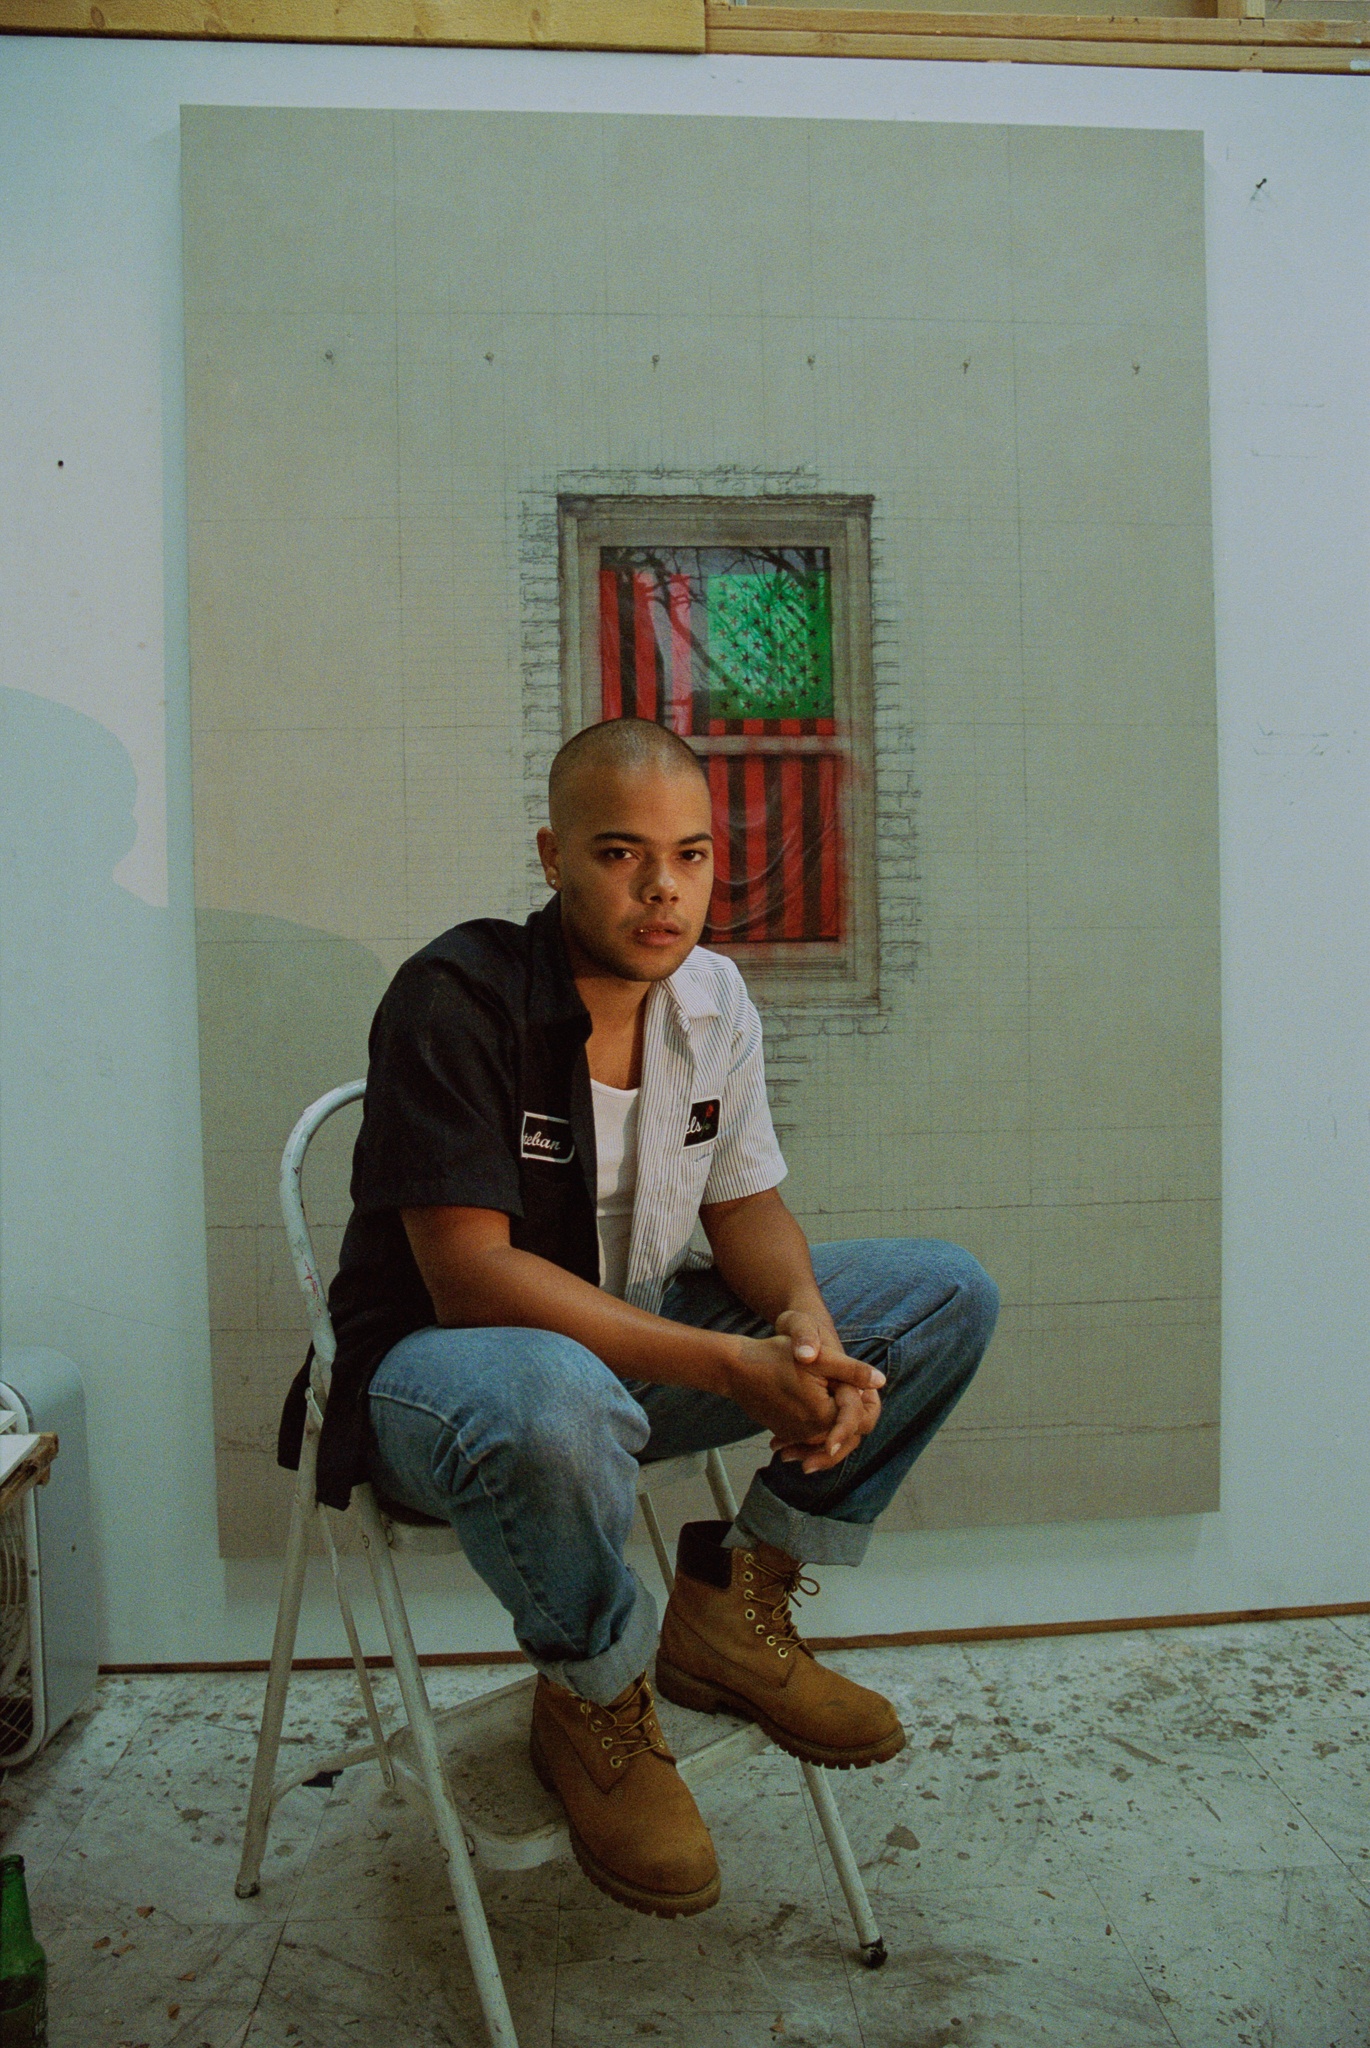 A photo of the artist Esteban Jefferson sitting in a metal folding chair with elbows on his thighs in front of an artwork on the wall. Jefferson wears jeans, boots, and a short sleeve button-down shirt over a white tank top.